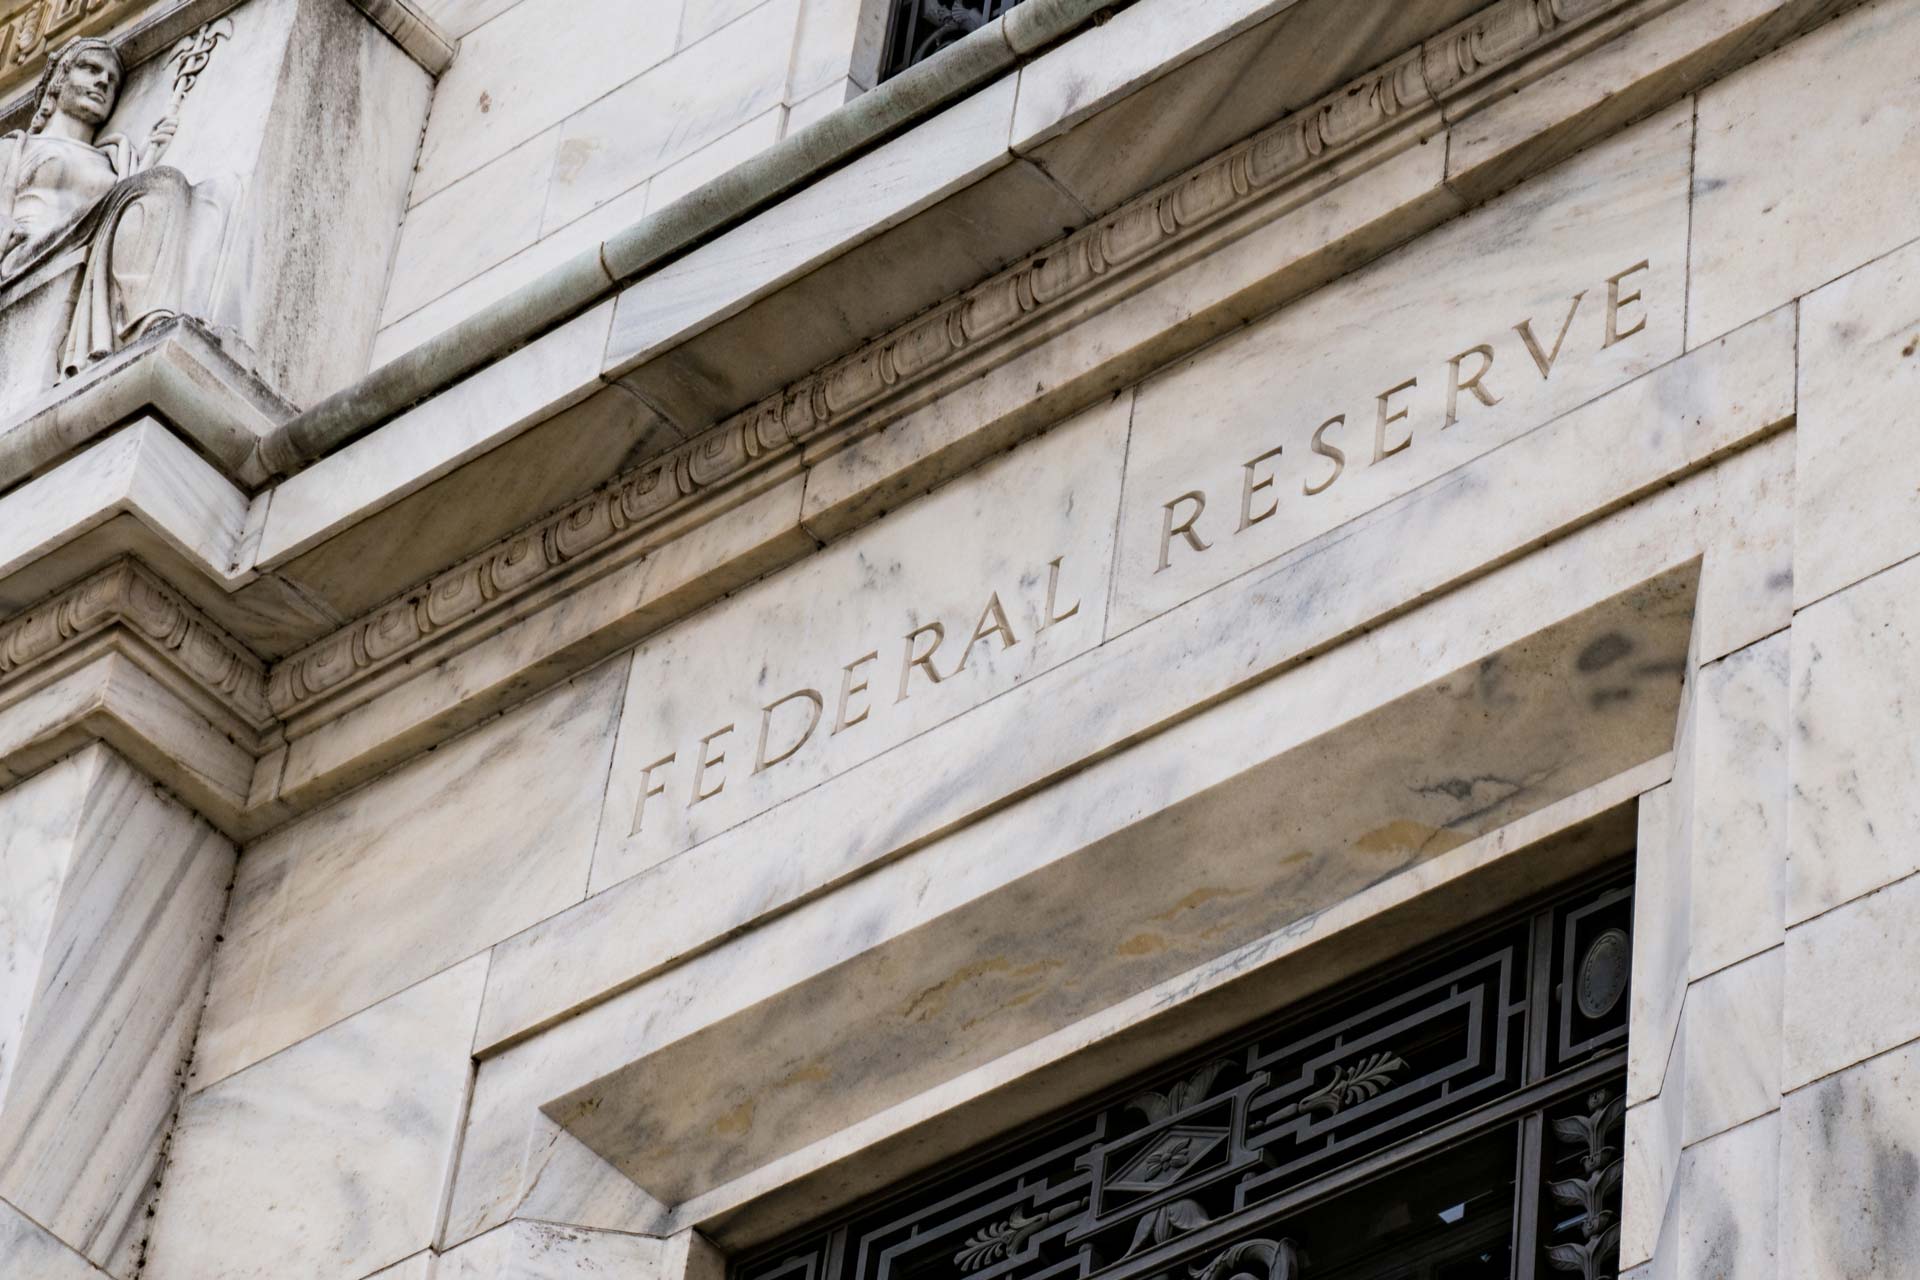 Update: FOMC willing to let the economy rip for now